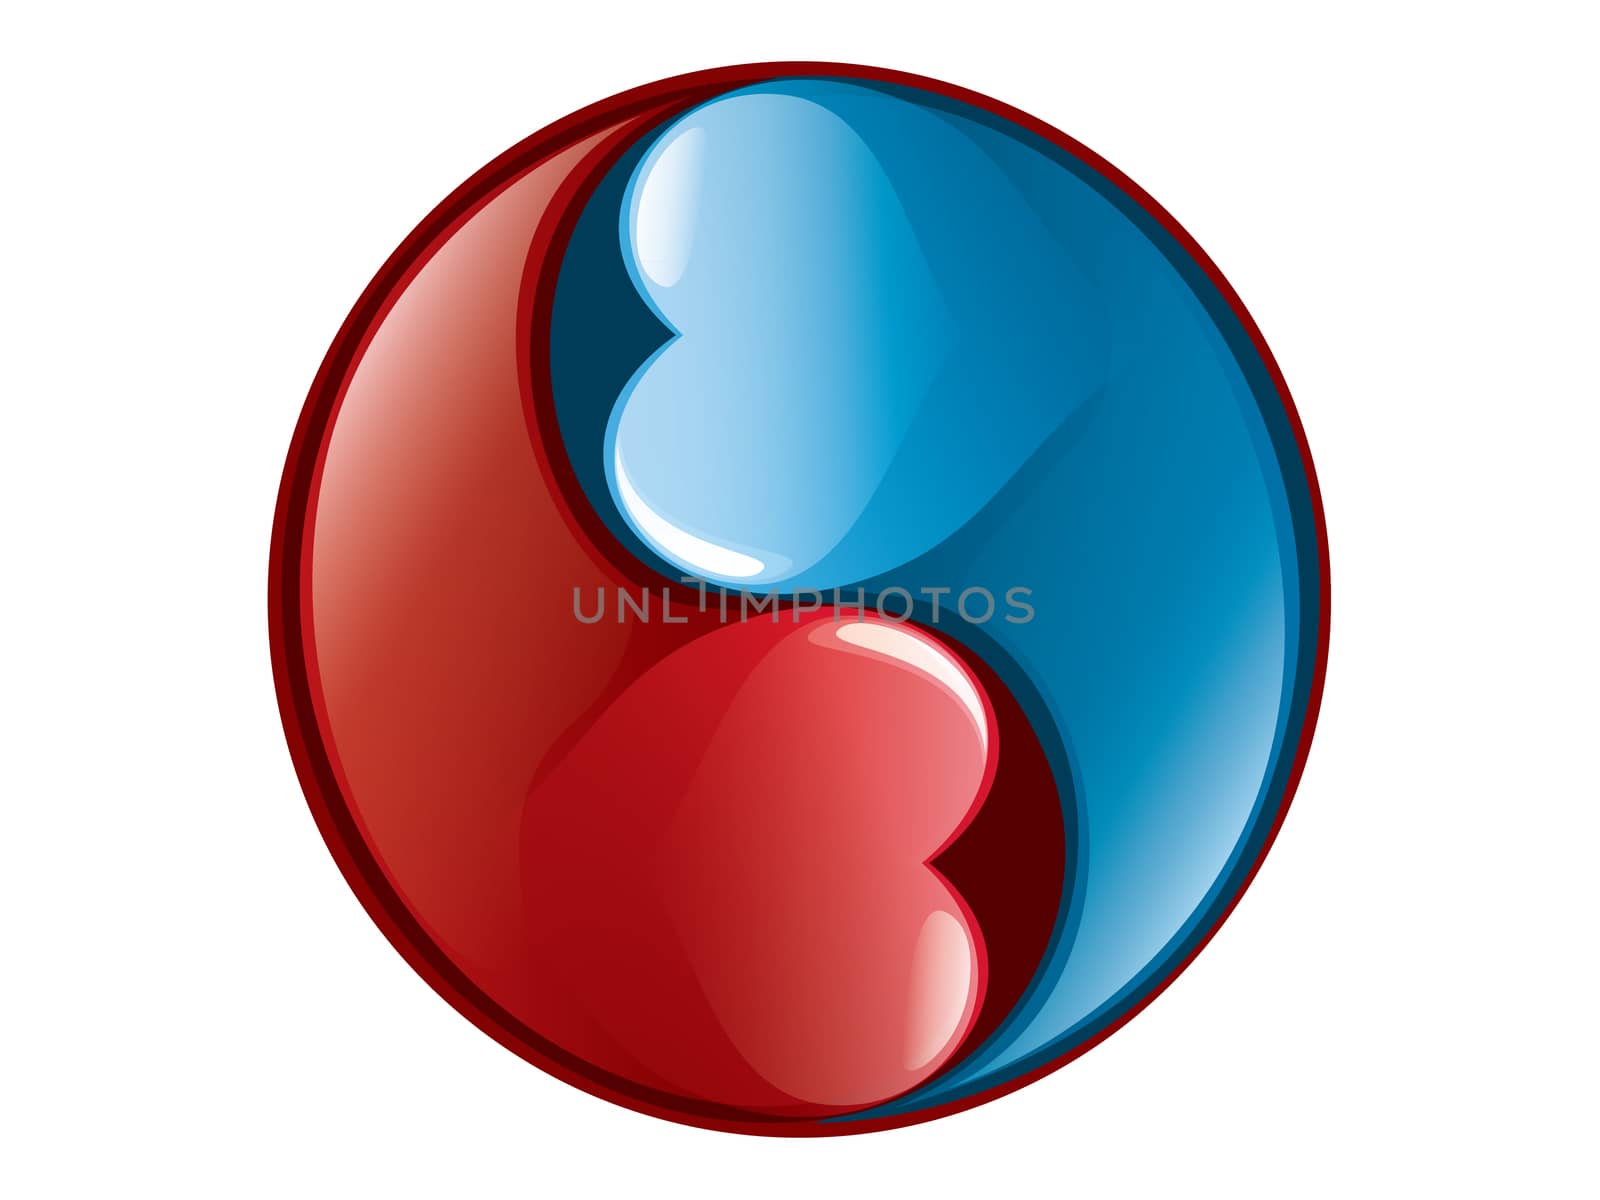 red and blue hearts composed the symbol dao